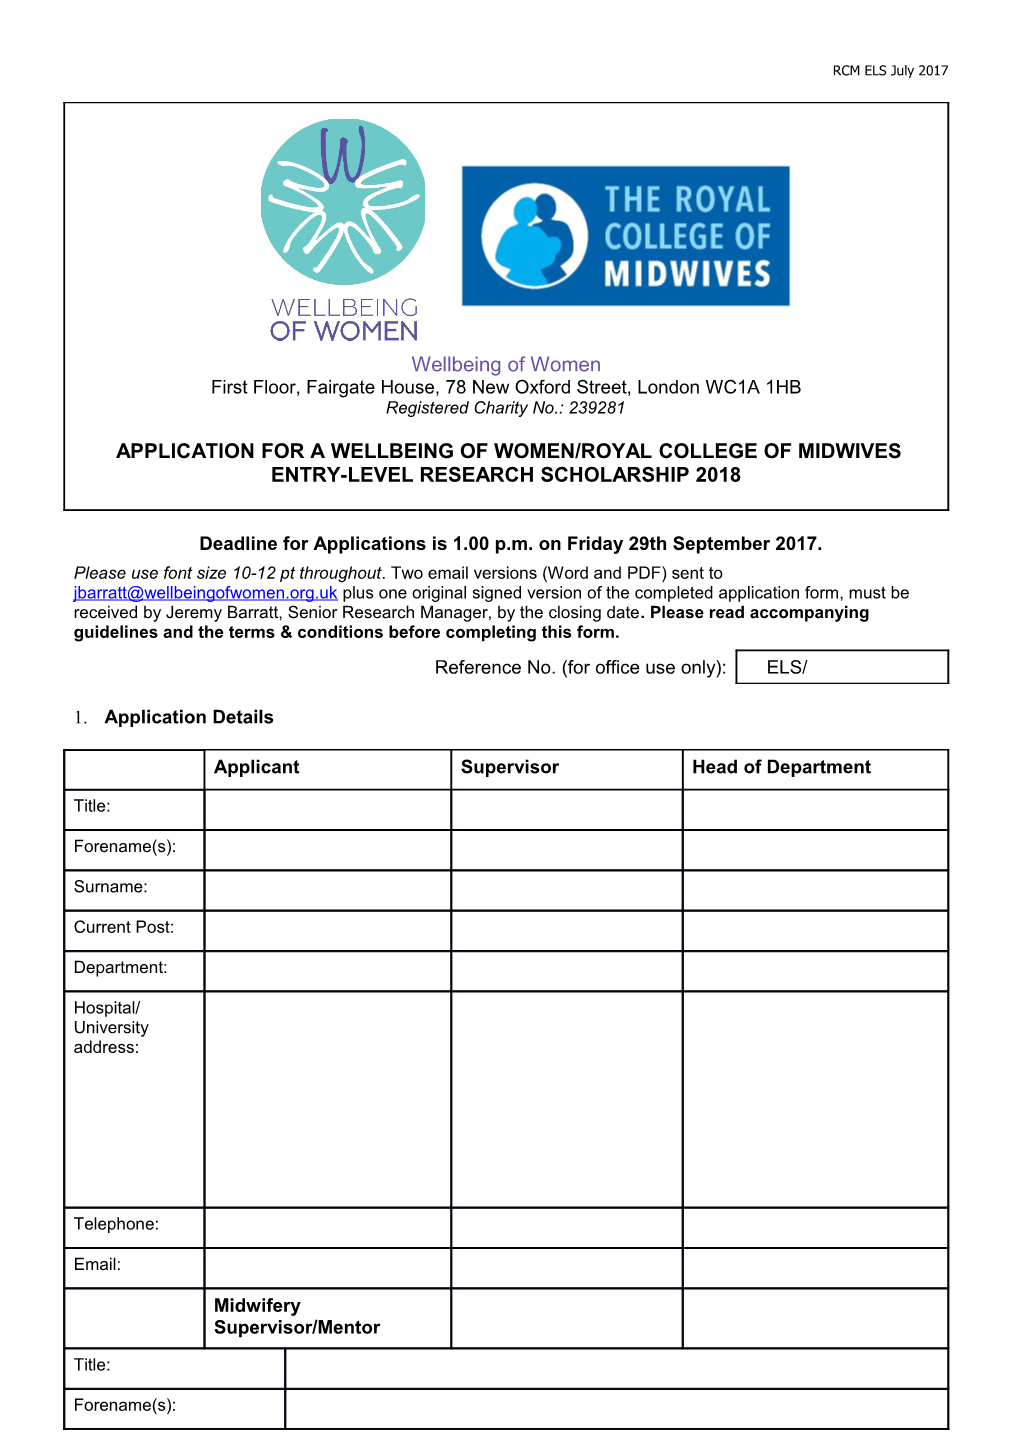 Application for a Wellbeing of Women/Royal College of Midwives